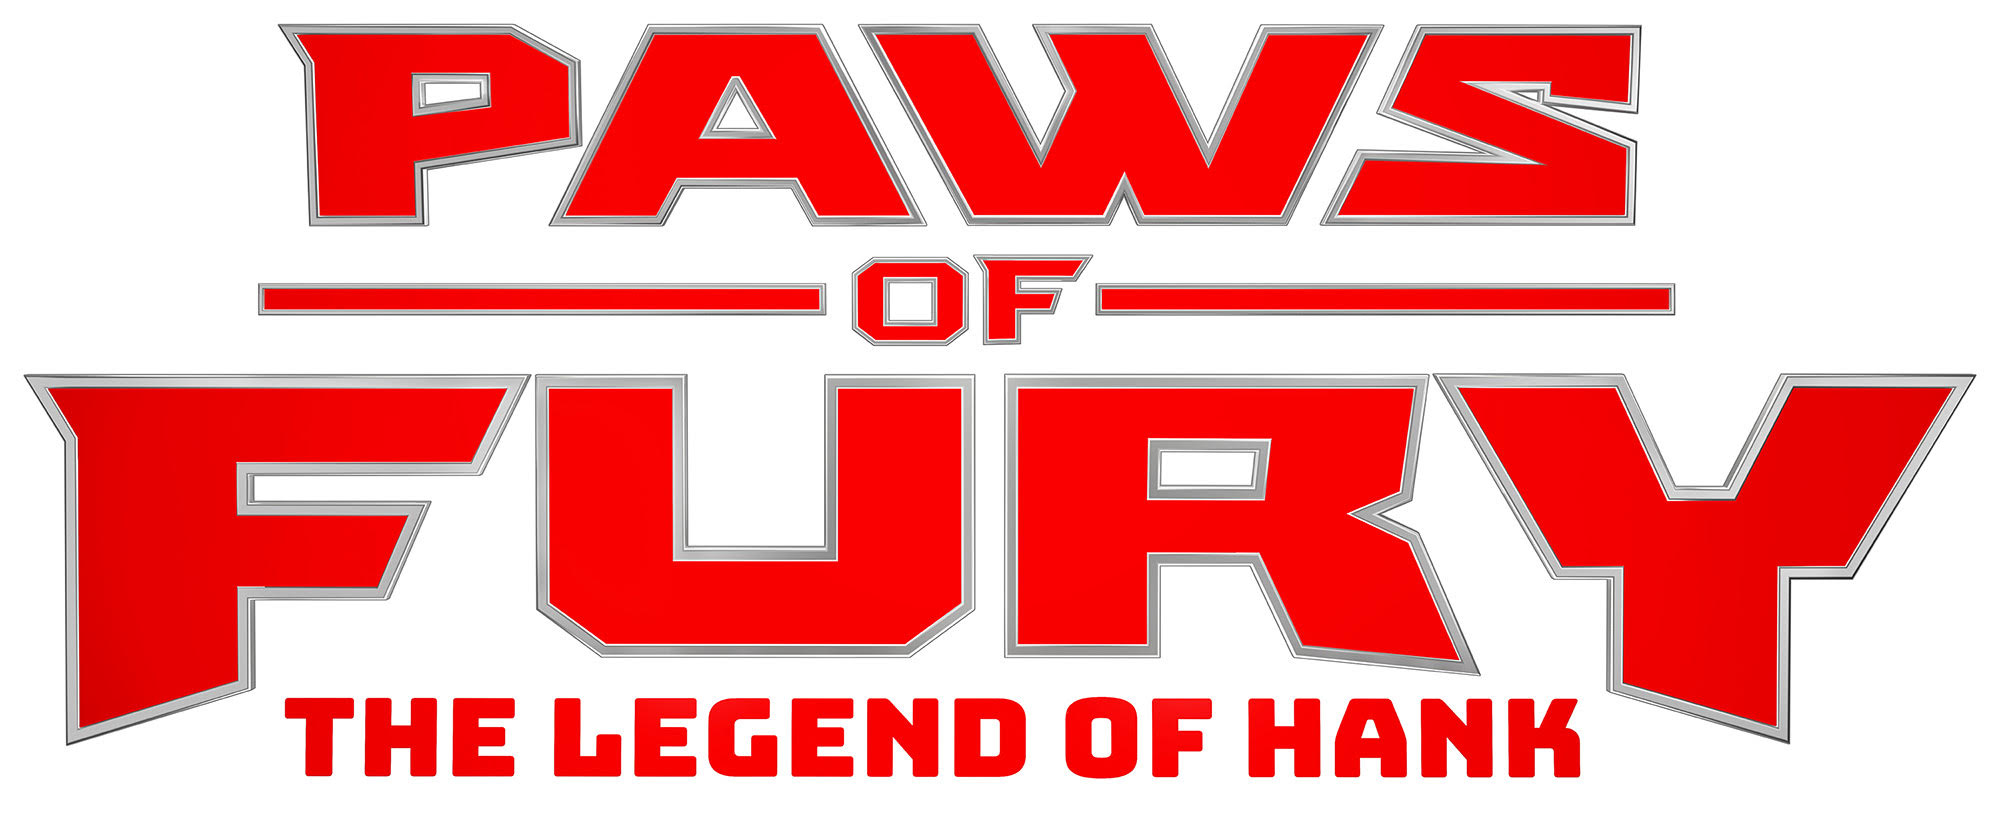 Paws of Fury: The Legend of Hank (a.k.a Blazing Samurai) - July